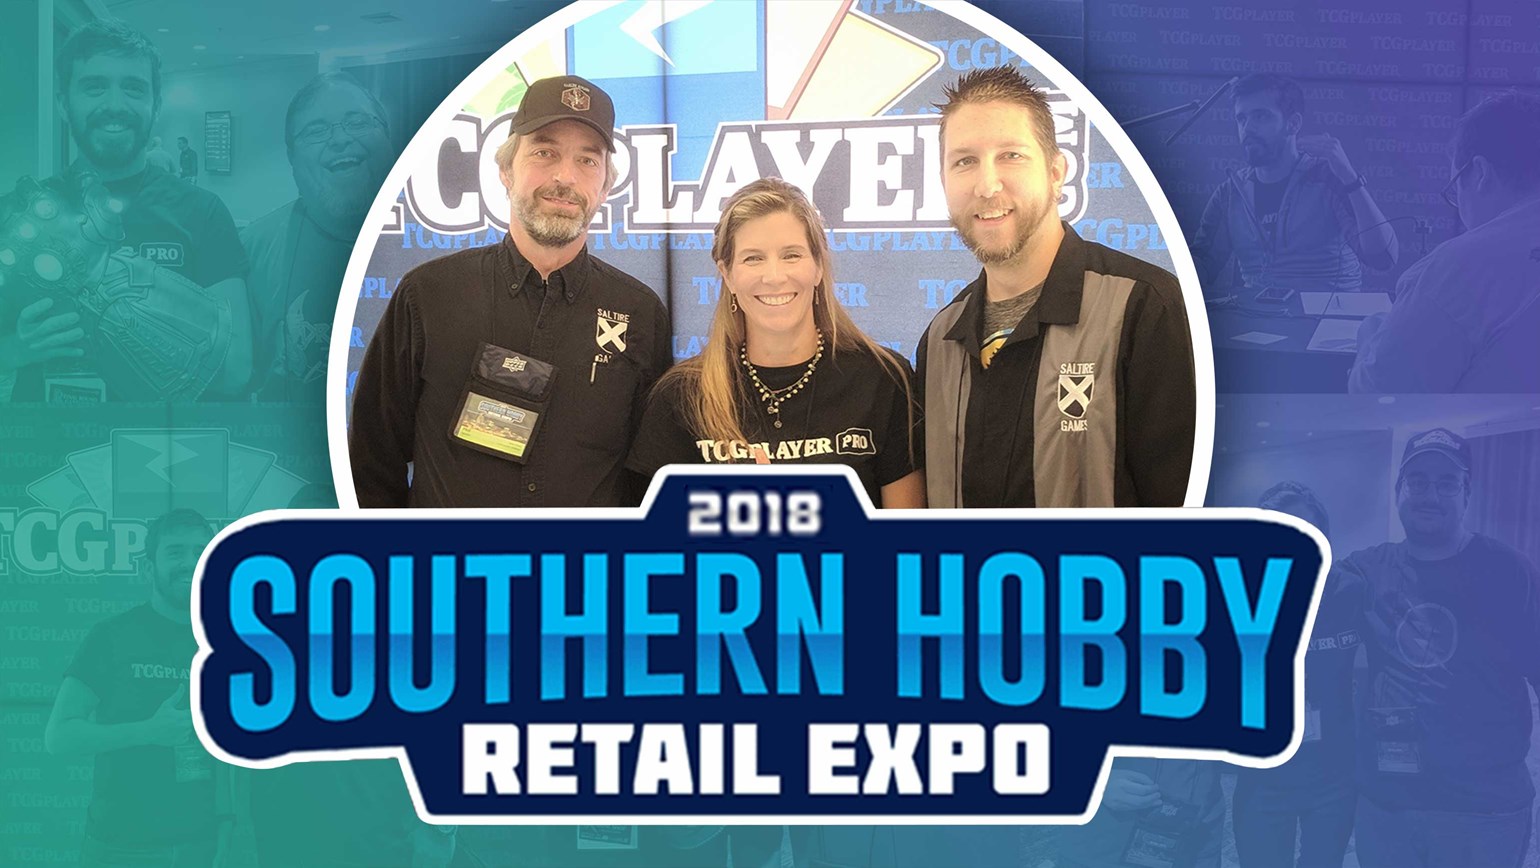 Game Store Owners at Southern Hobby Retail Expo Share Experience with TCGplayer Pro